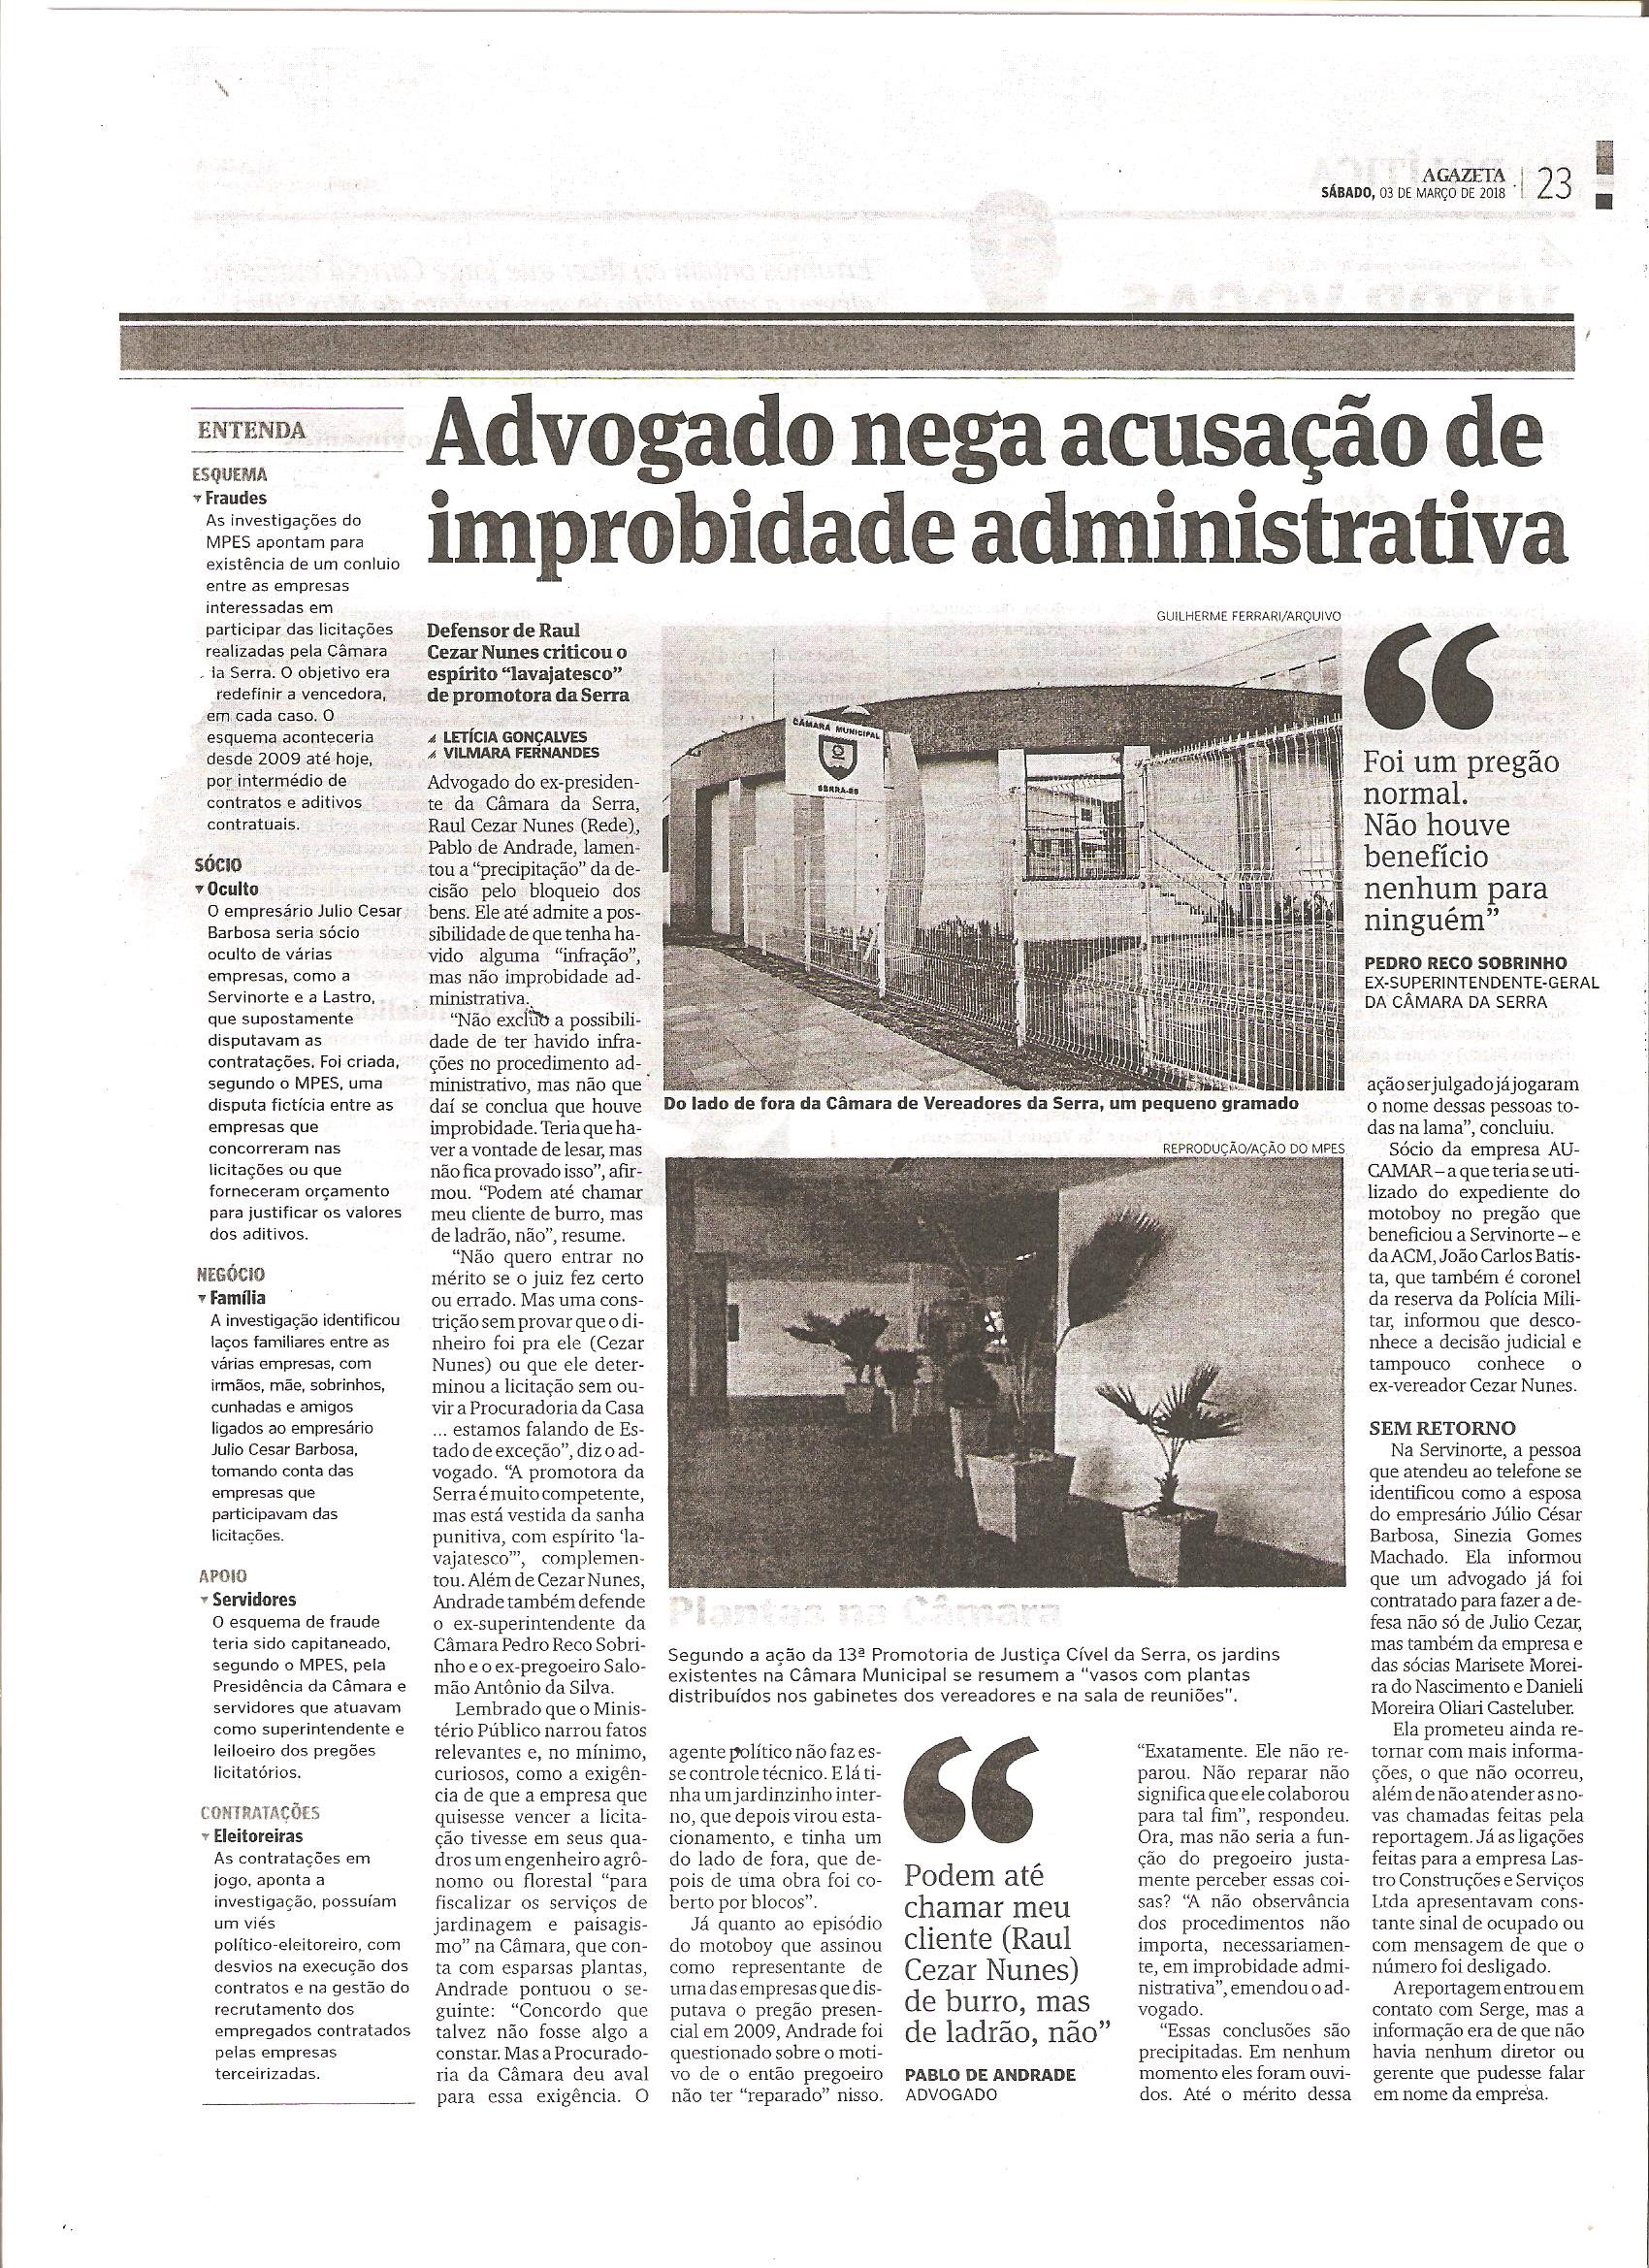 CLIPPING AG 03 03 PAG 23